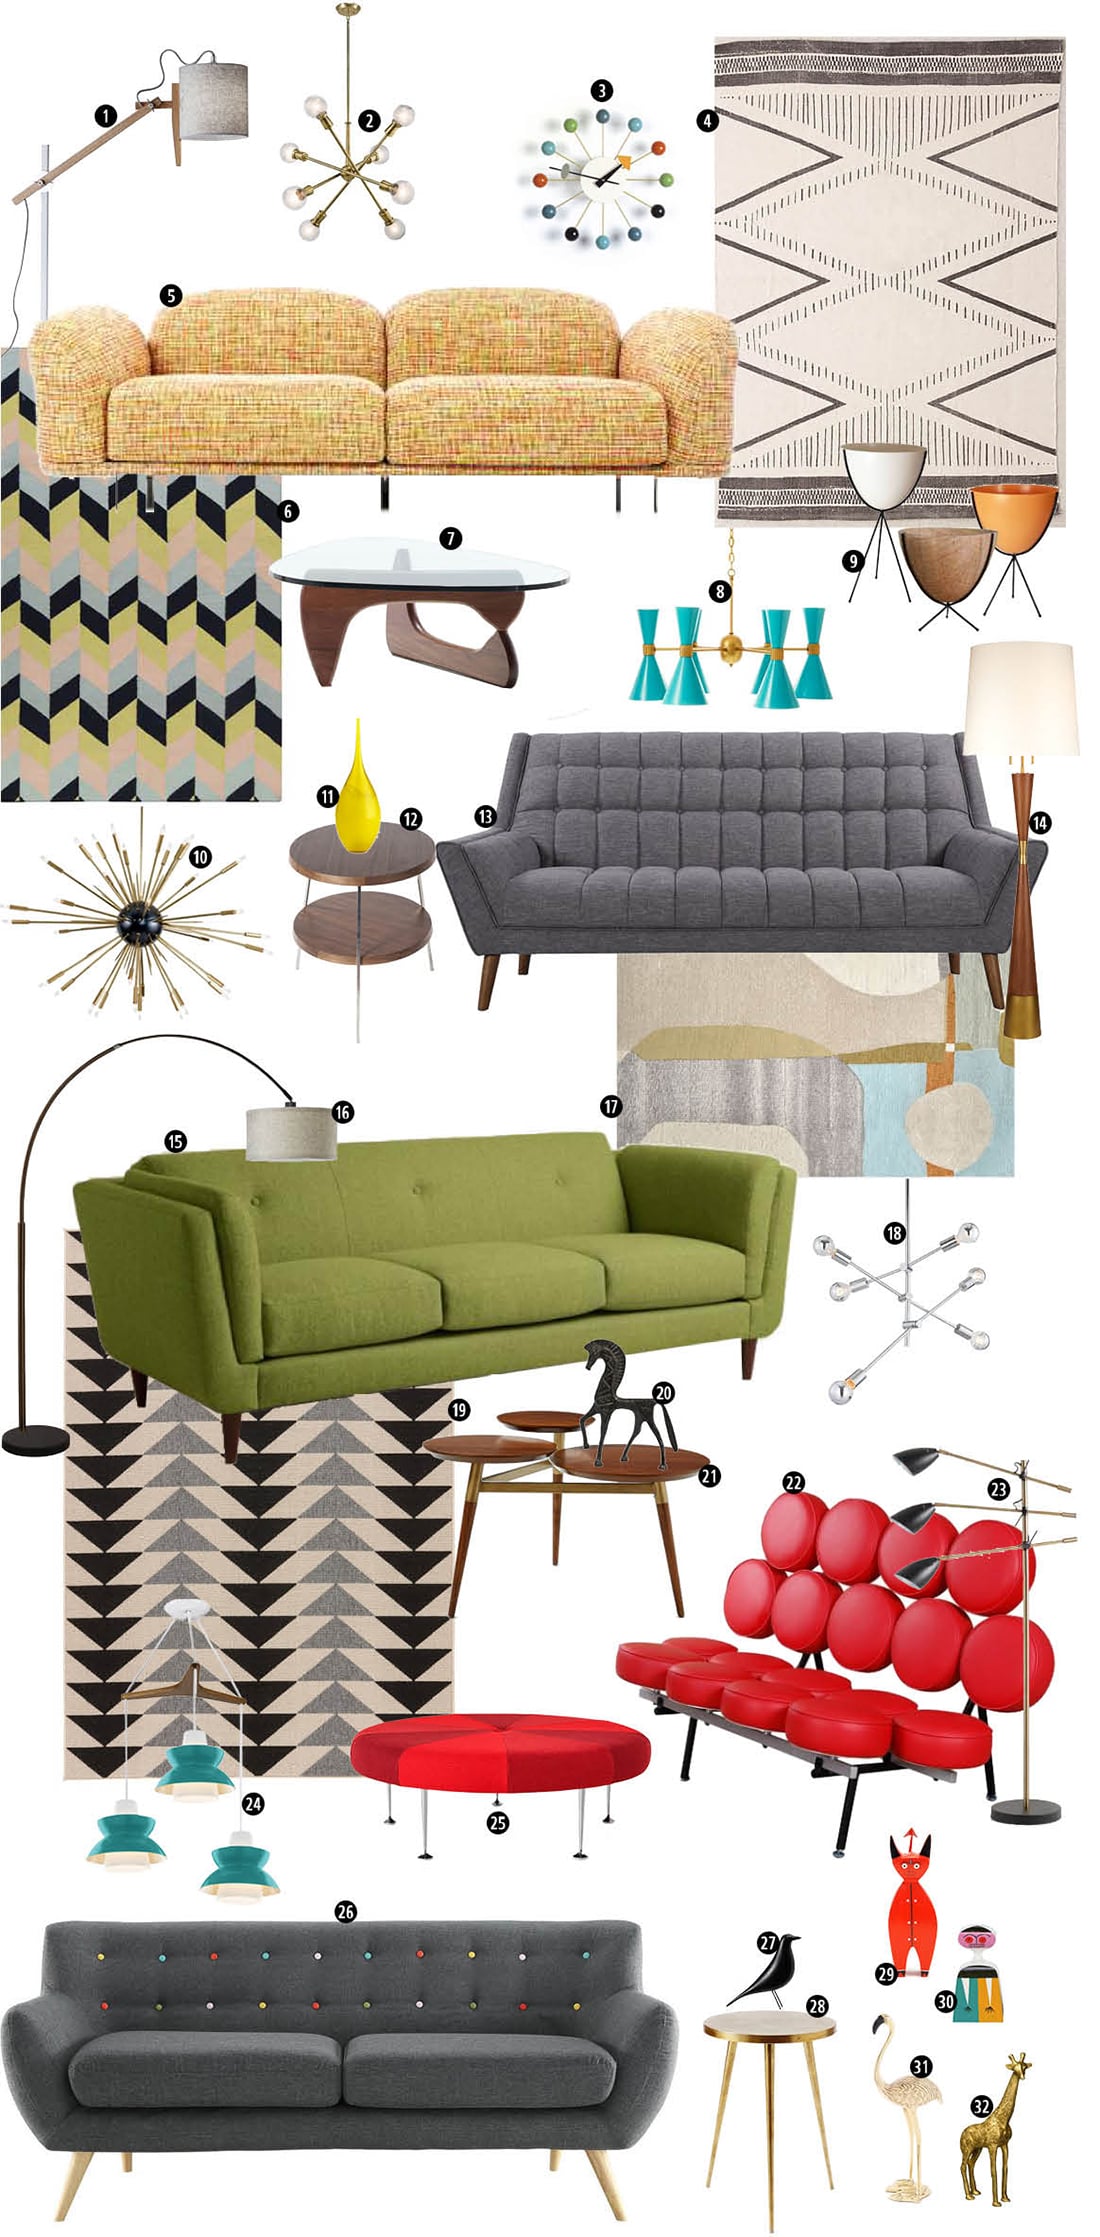 8 Signs Mid-Century Modern Decor is the Right Home Style for You • Little Gold Pixel • Click through to find out if you're compatible with Mid-Century Modern decor!